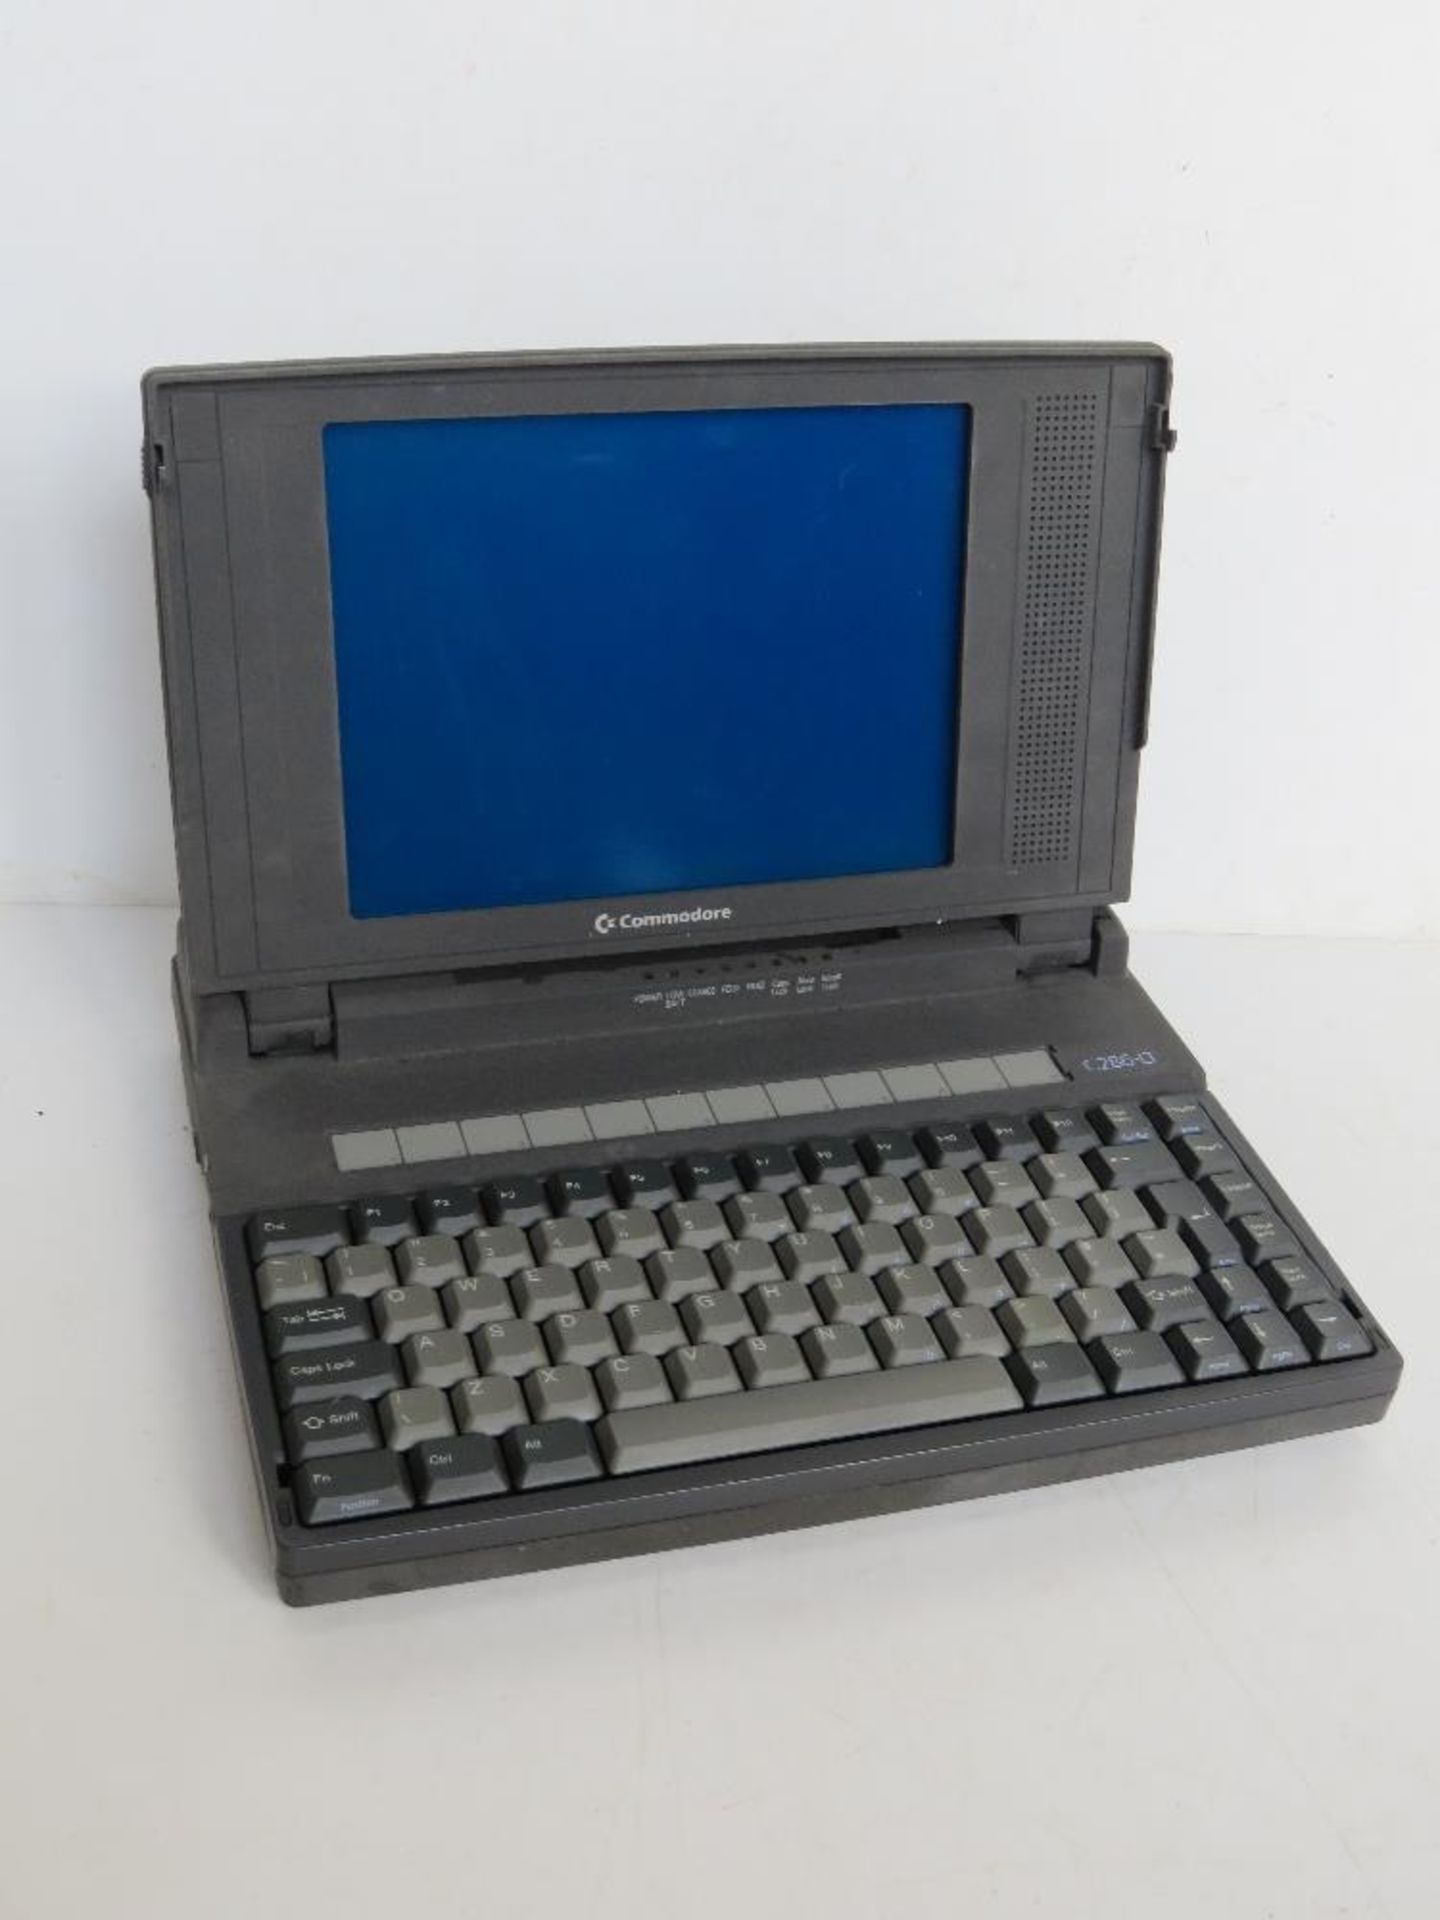 A Commodore personal computer C286-LT, no battery or cables.